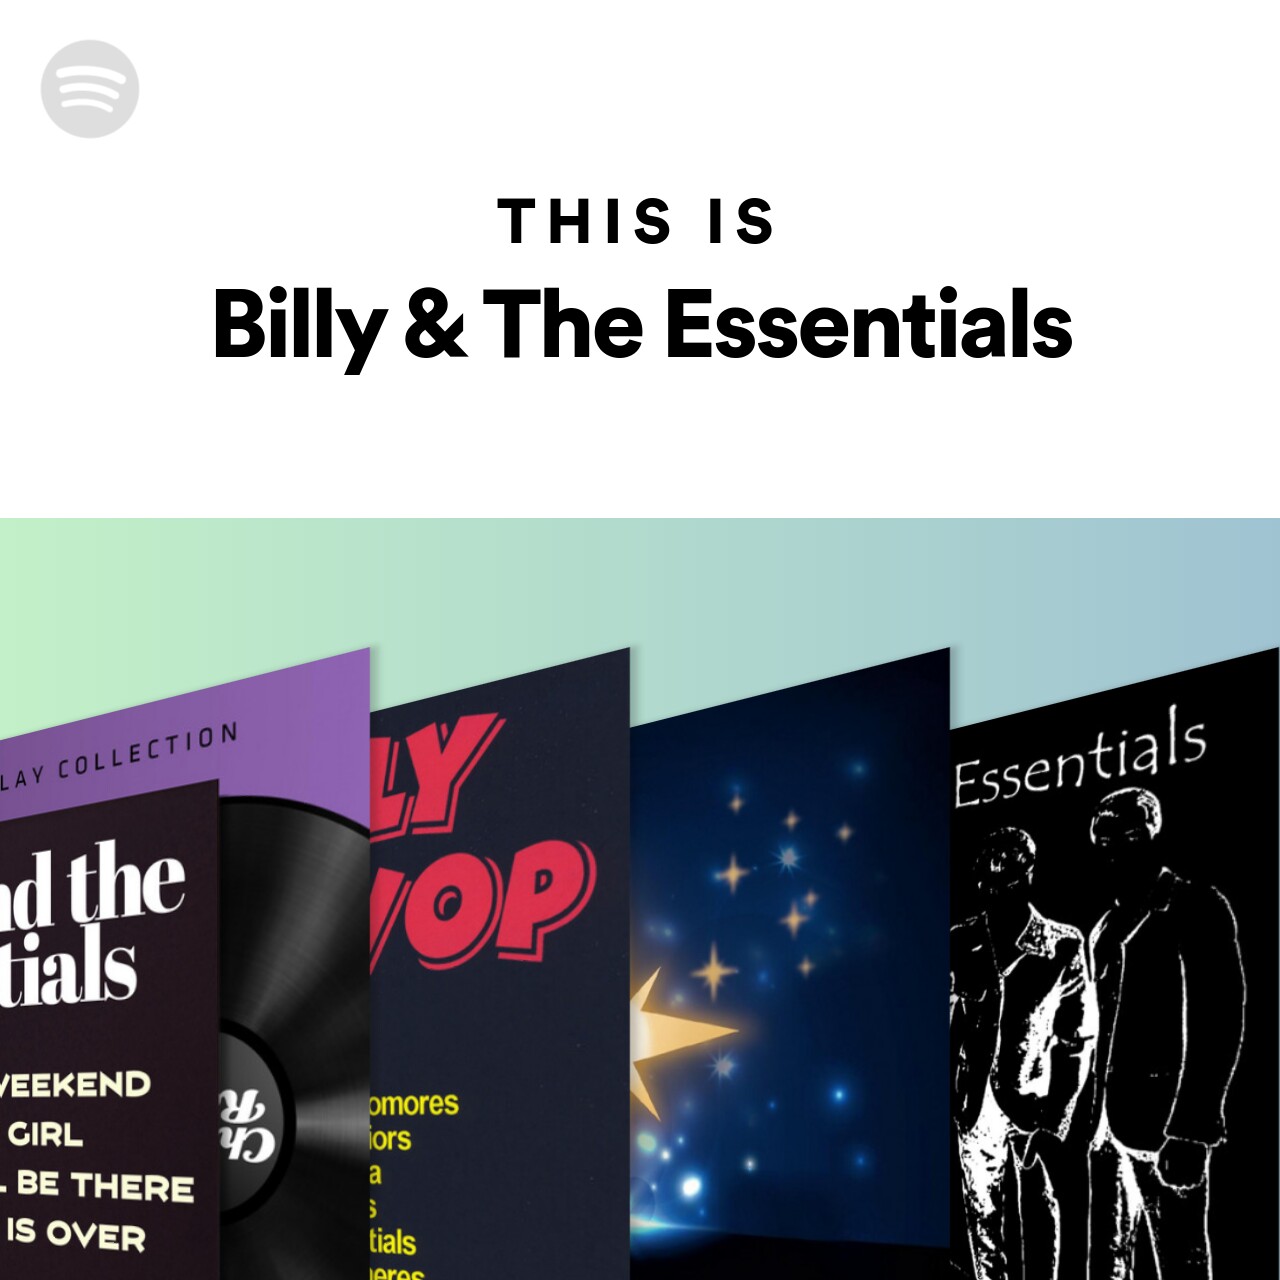 This Is Billy & The Essentials